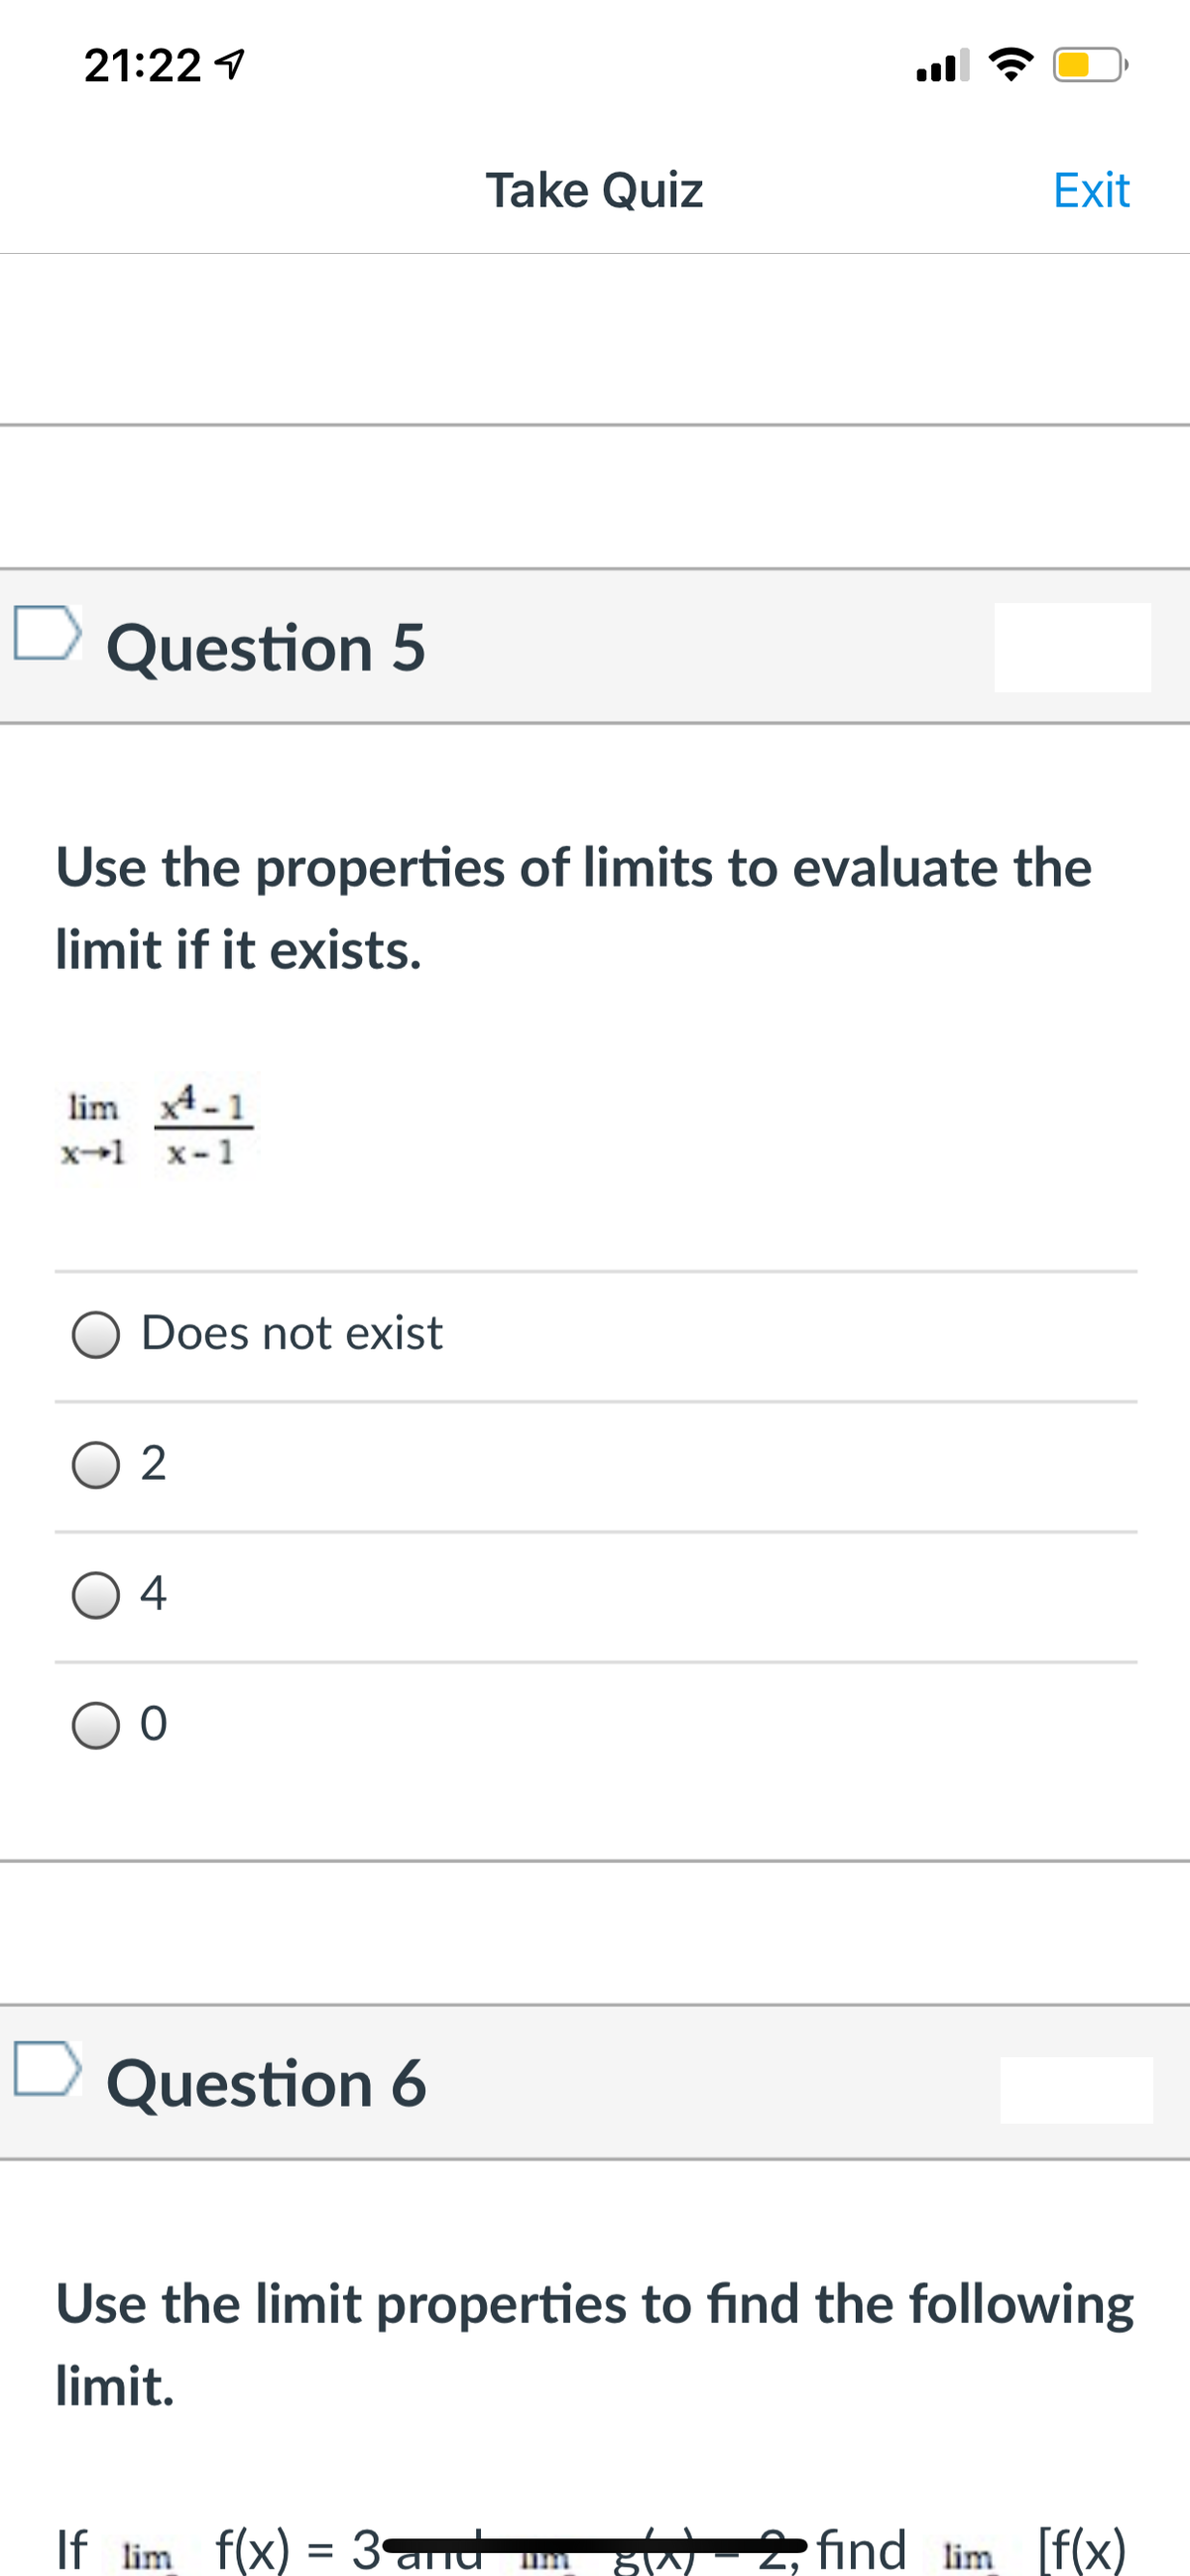 21:22 1
Take Quiz
Exit
Question 5
Use the properties of limits to evaluate the
limit if it exists.
lim x4-1
x-1 x-1
Does not exist
4
Question 6
Use the limit properties to find the following
limit.
If lim f(x) = 3and
2, find lim [f(x)
